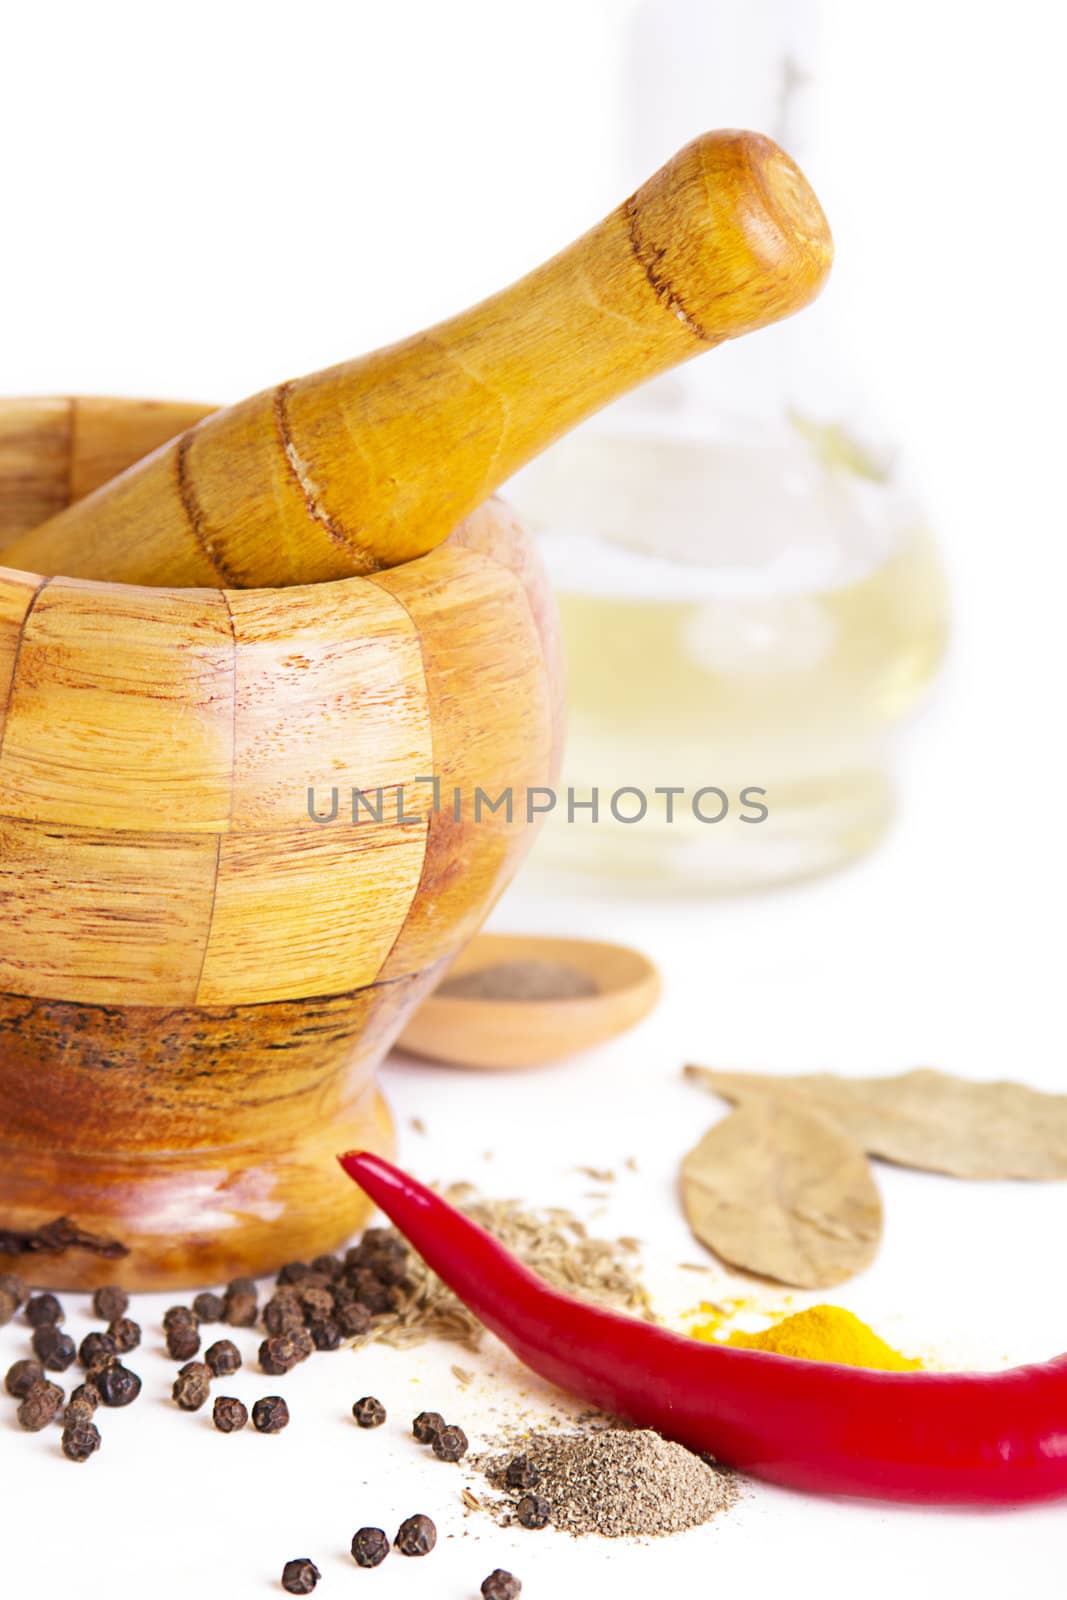 Mortar with pestle, variety of spices and oil over white